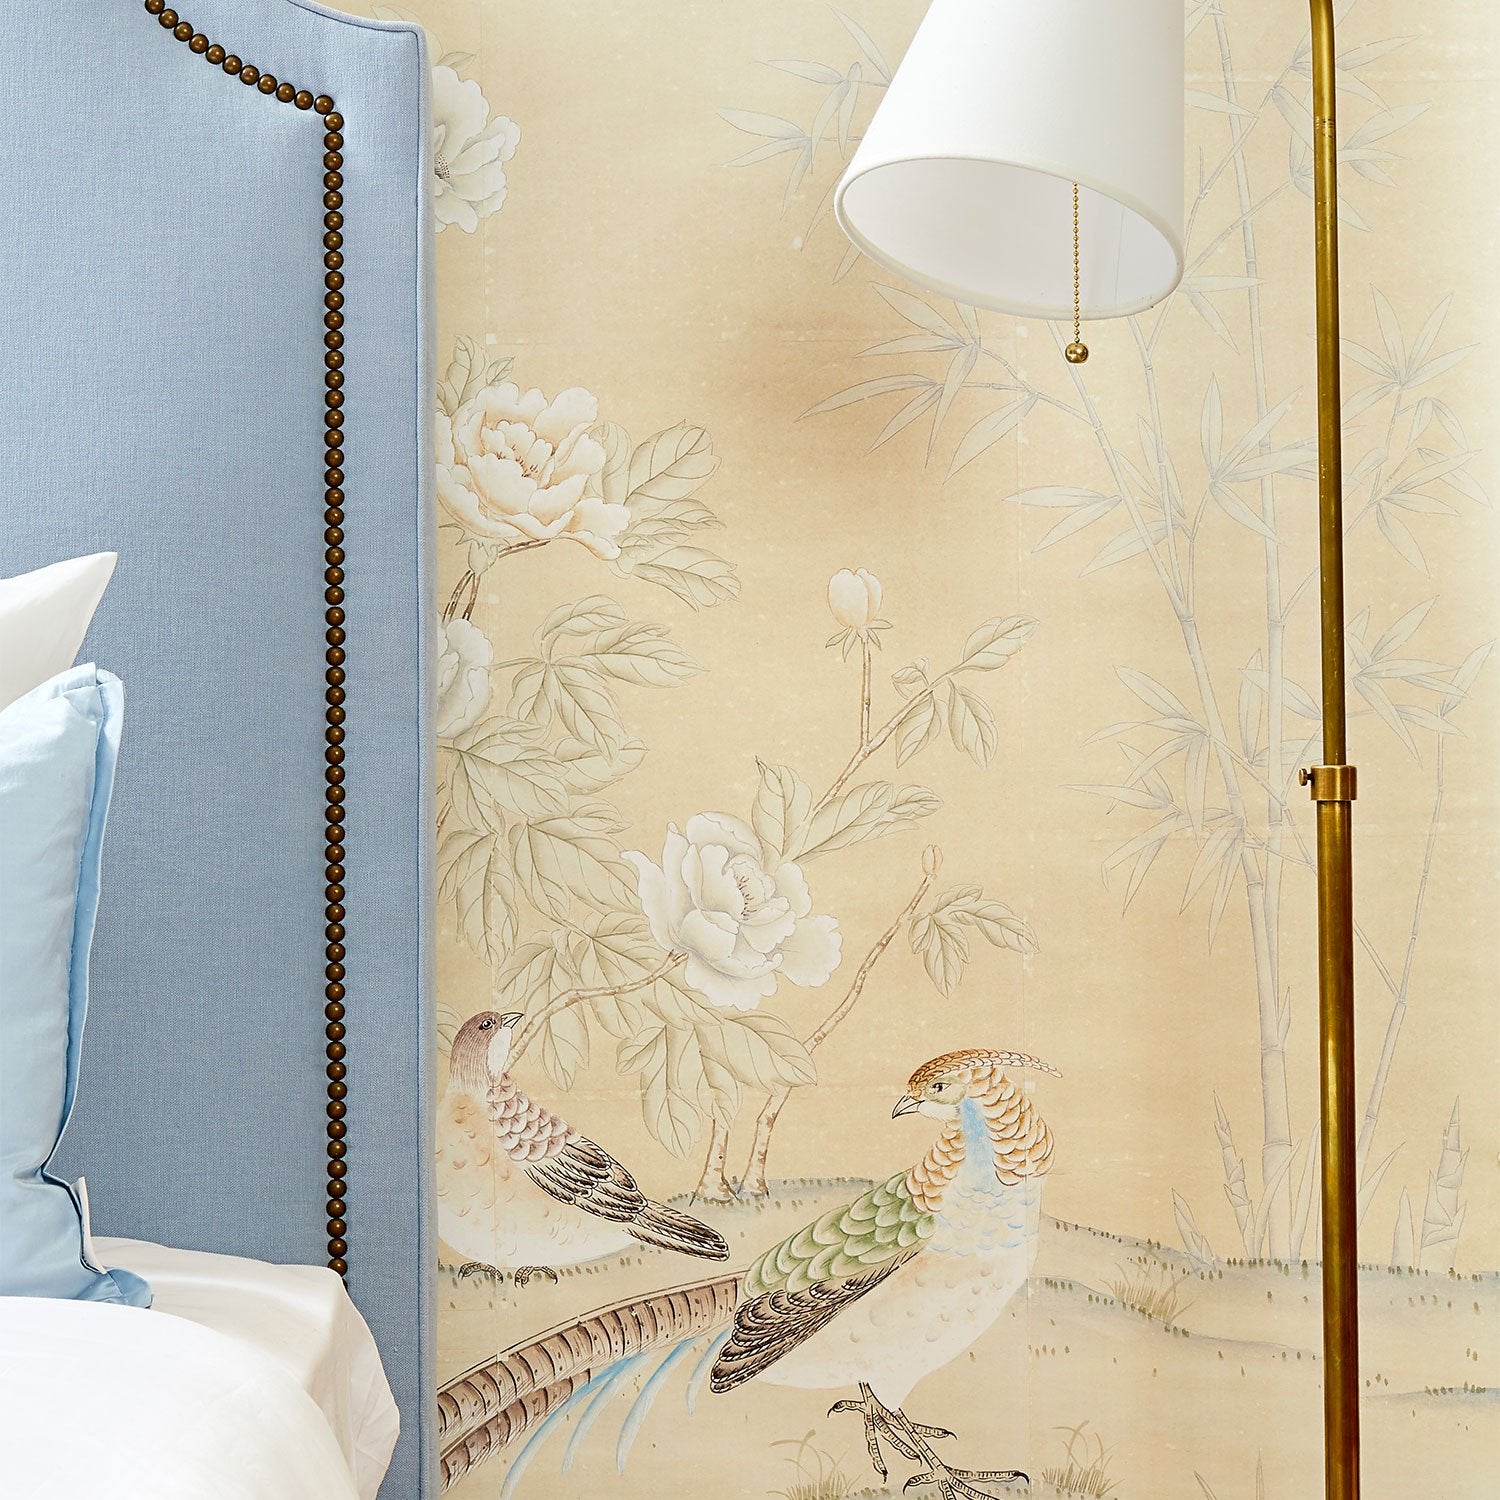 Vincennes in Cream Chinoiserie Wallpaper Mural in Bedroom